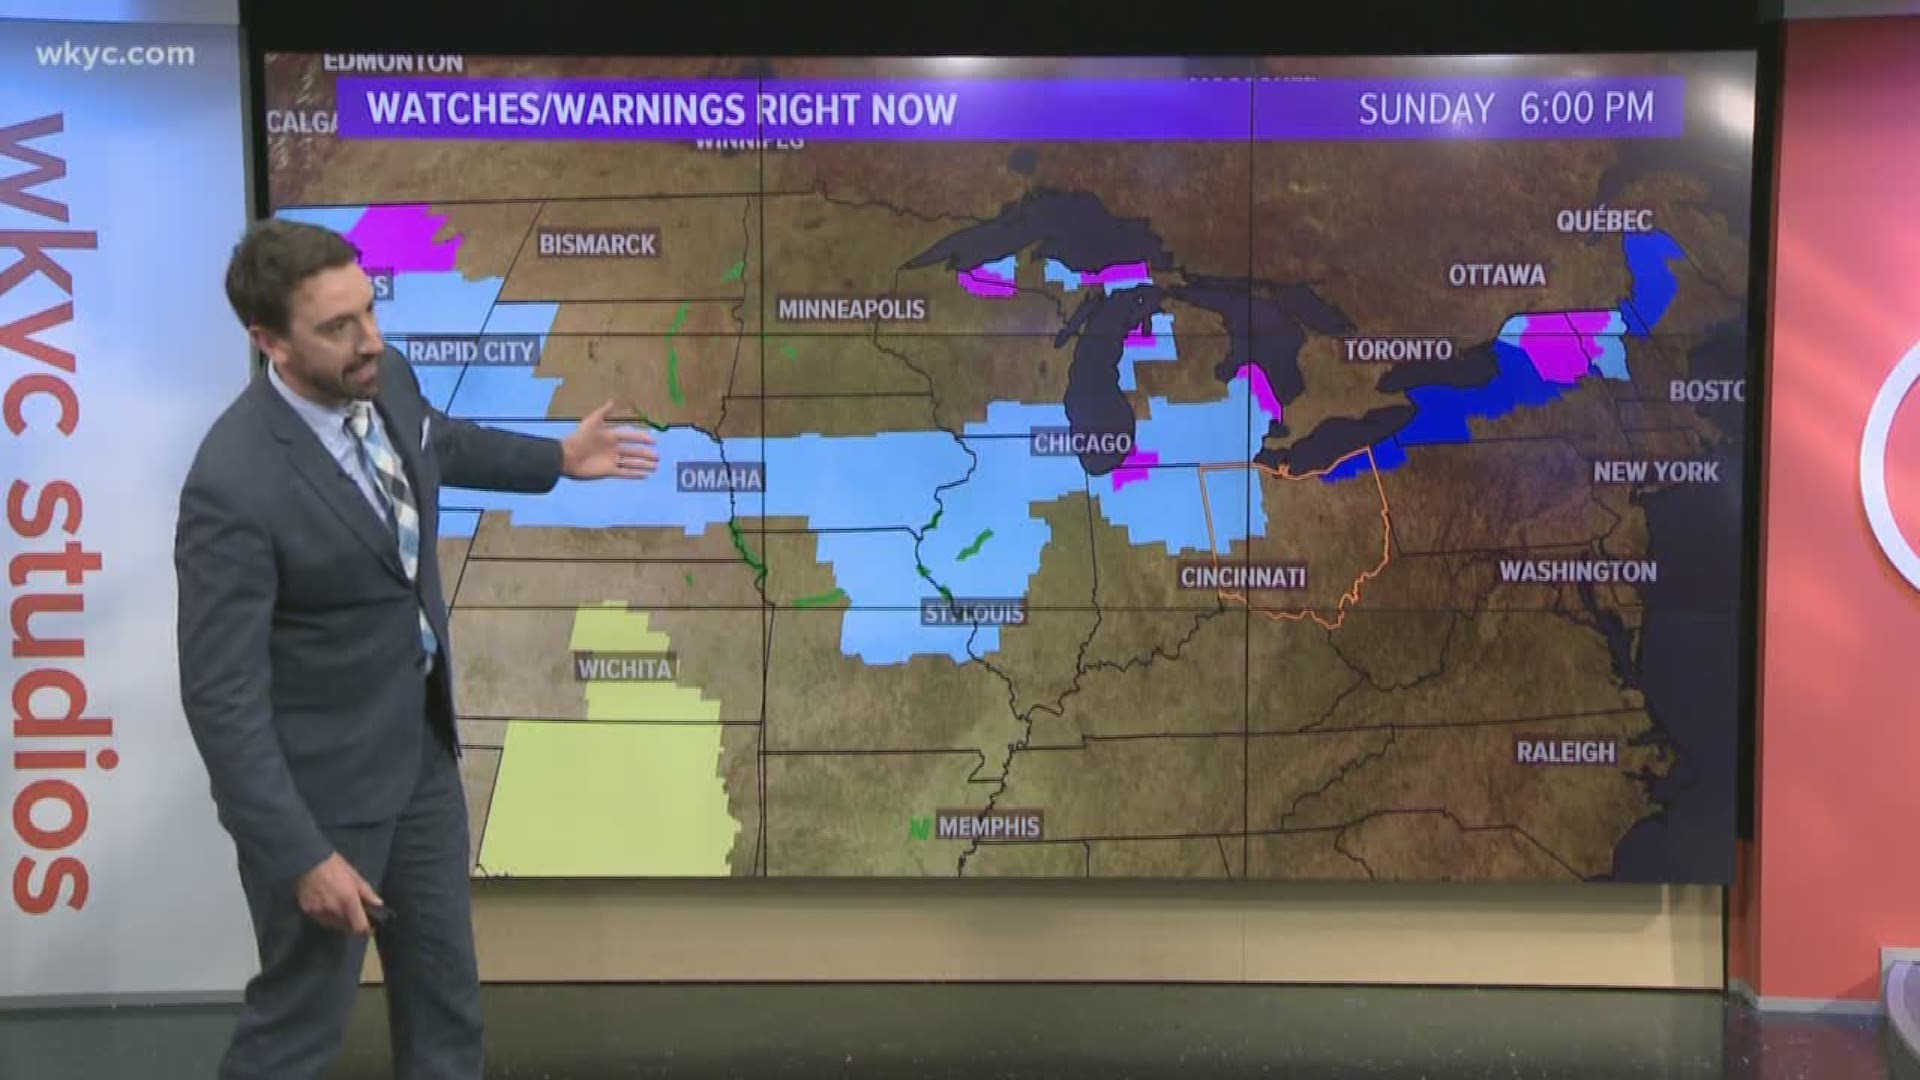 Some areas could get up to four inches of snow. Matt Wintz gave us an update.